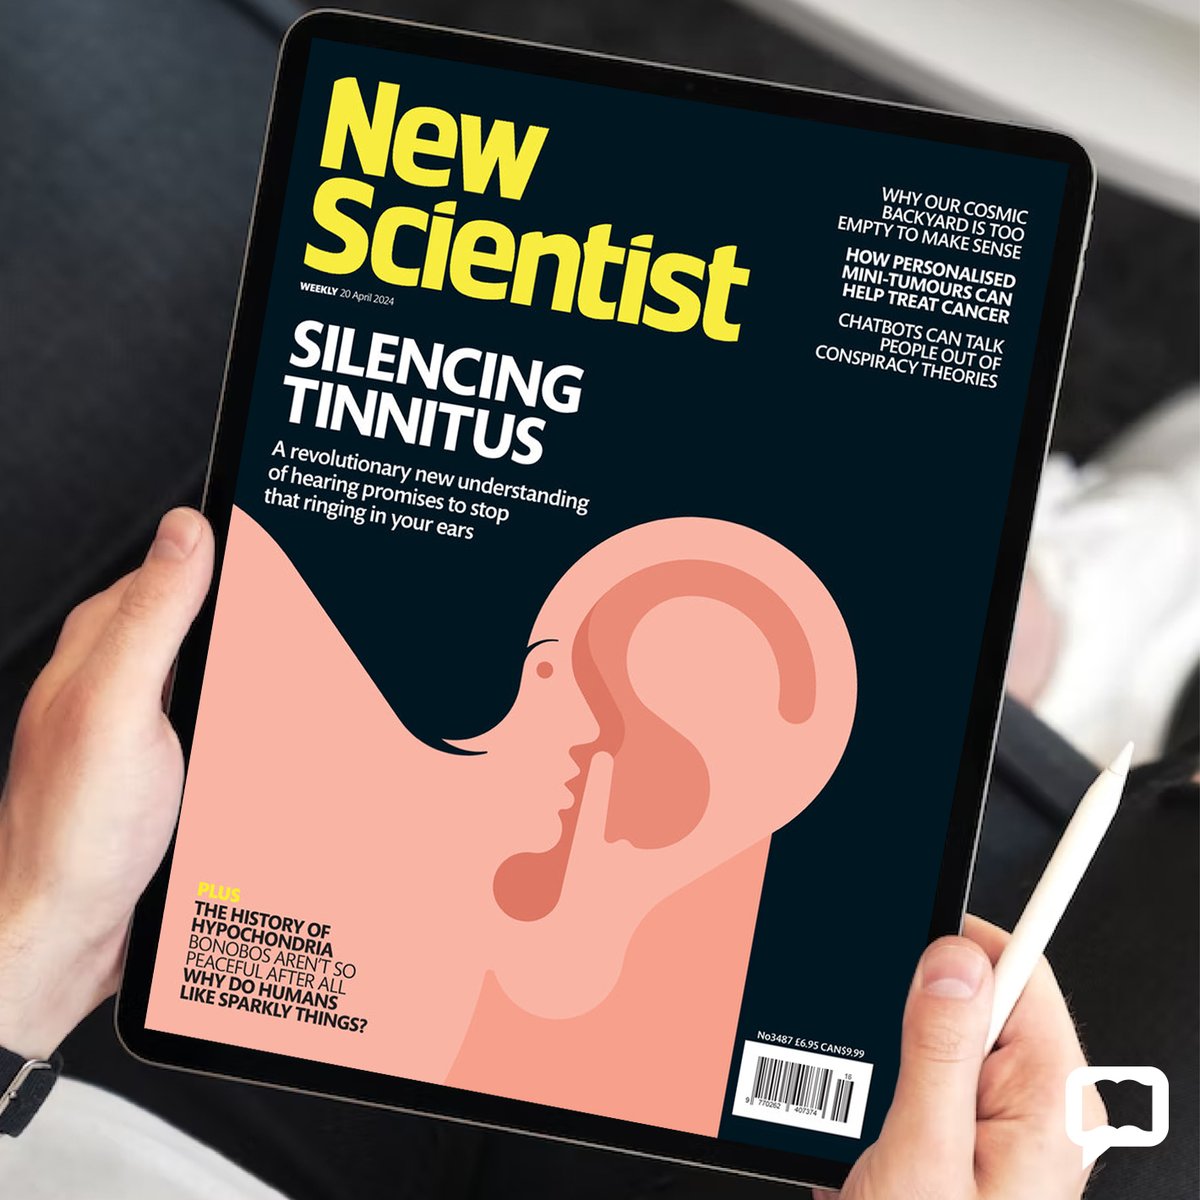 Discover the latest issue of @newscientist and more eMagazines - available on #BorrowBox now!